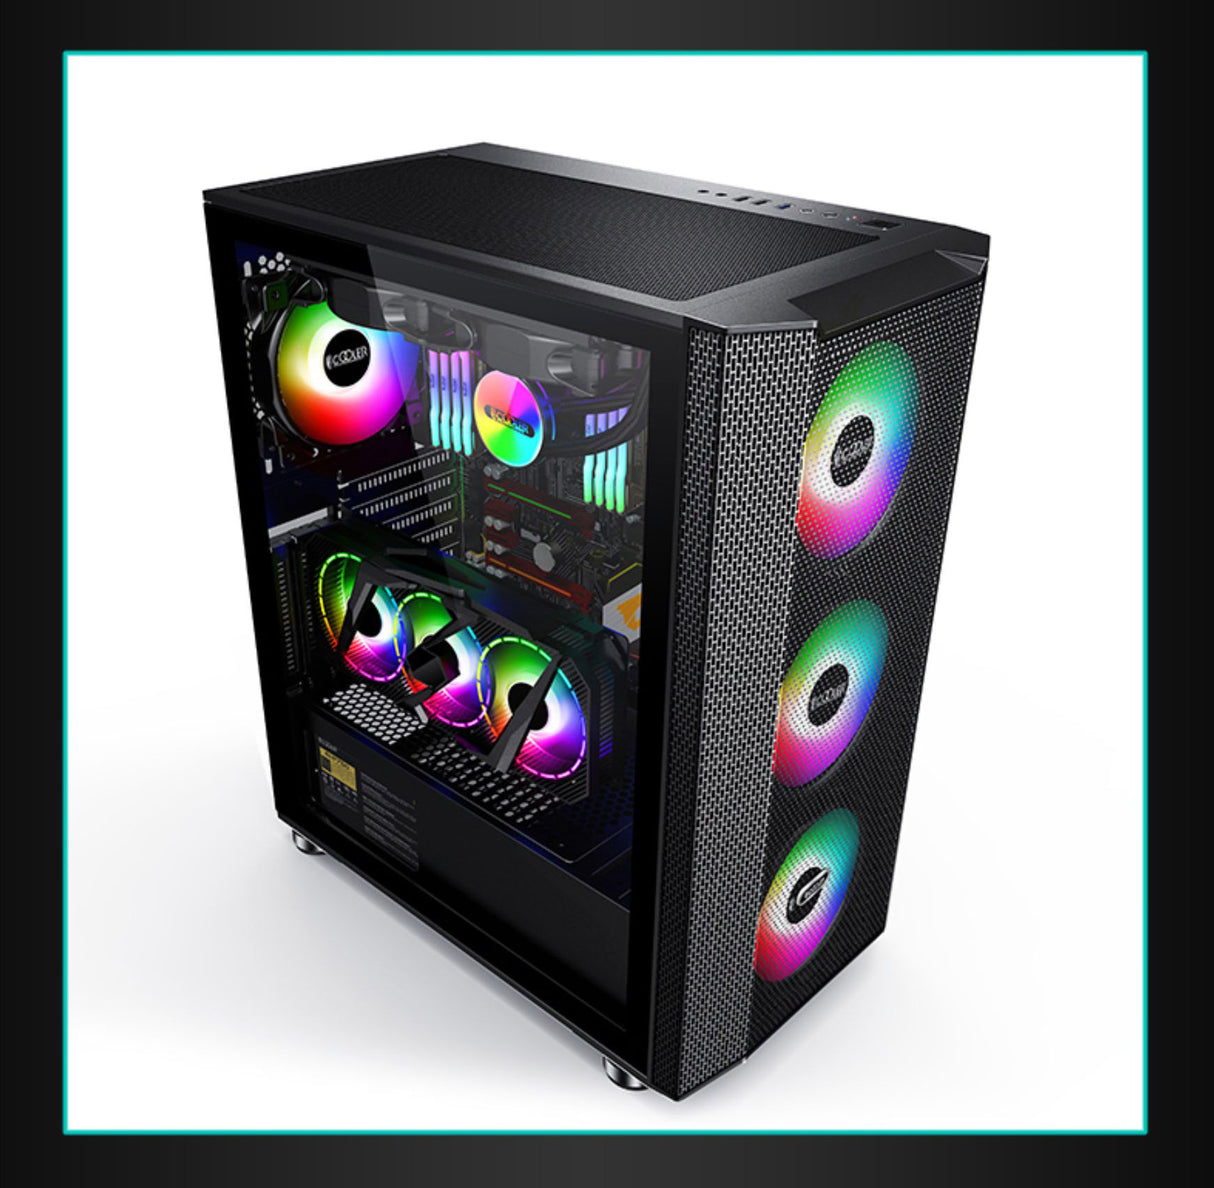 PCcooler GAME 7 Black ATX TG Mid Tower Case (with 1*120mm RGB Fan)